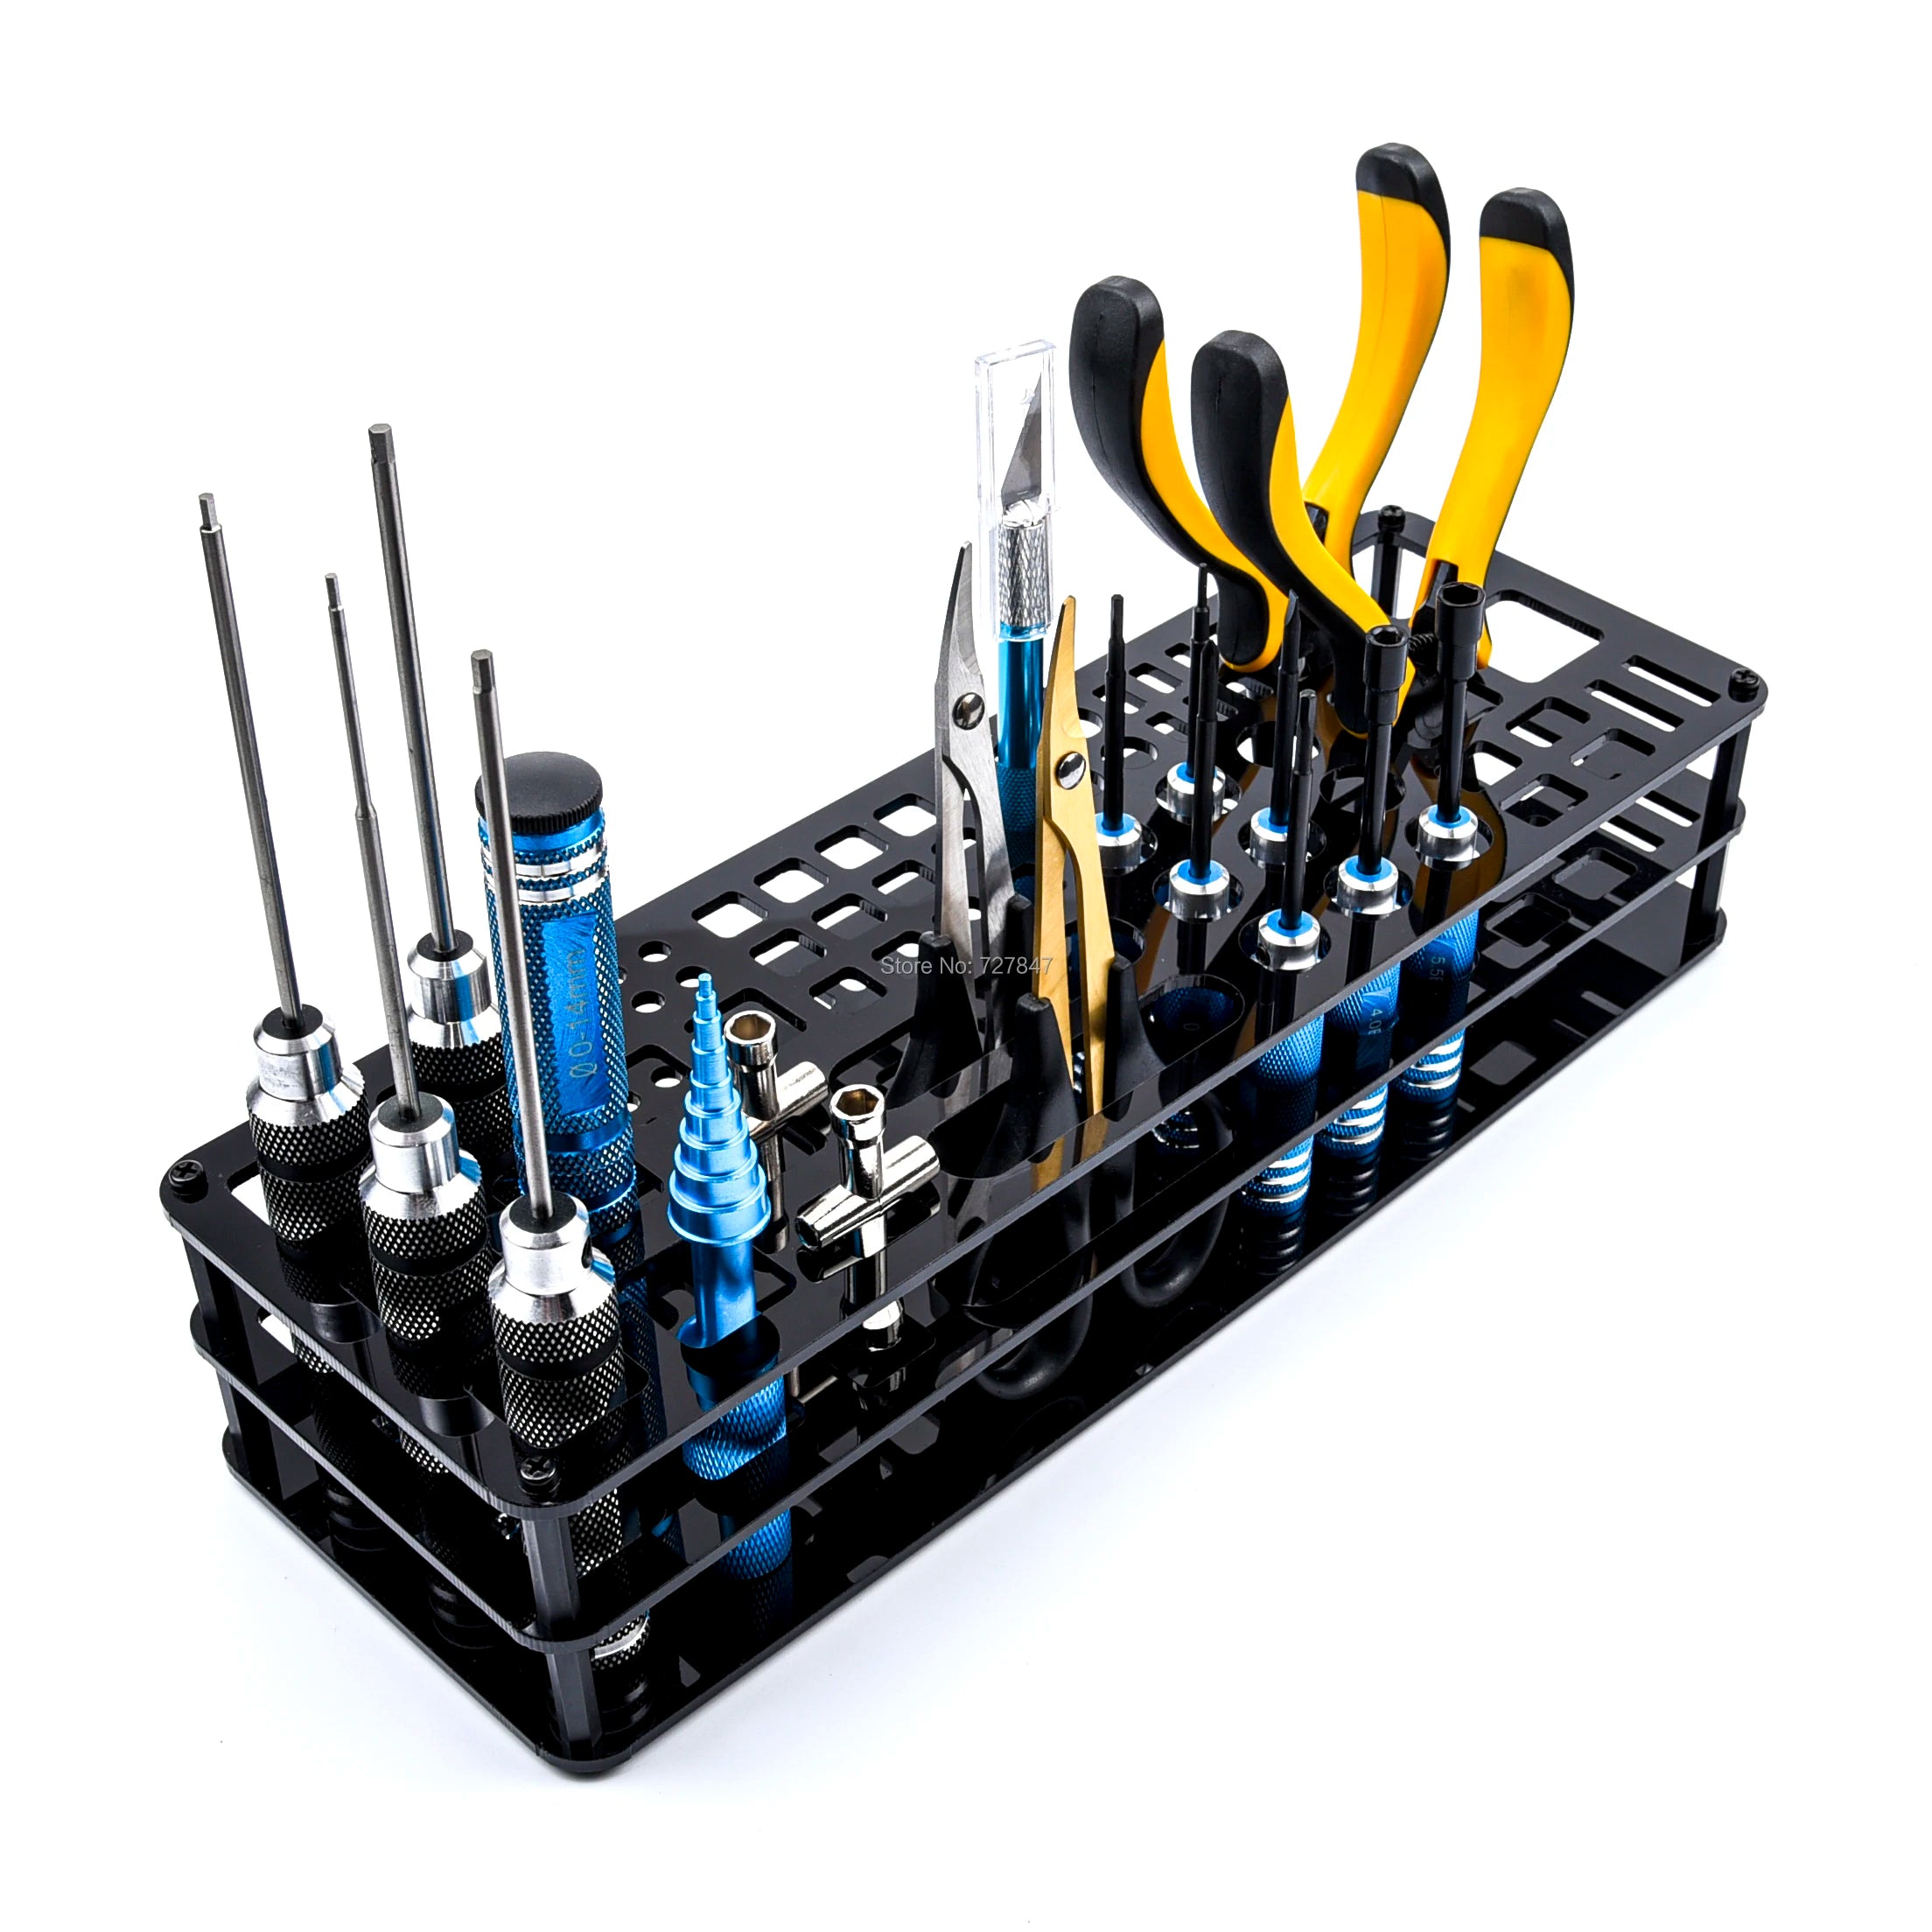 63 Hole Screwdriver Storage Rack Holder, ONLY the Screwdriver Organizers, no included the screwdriver and pliers